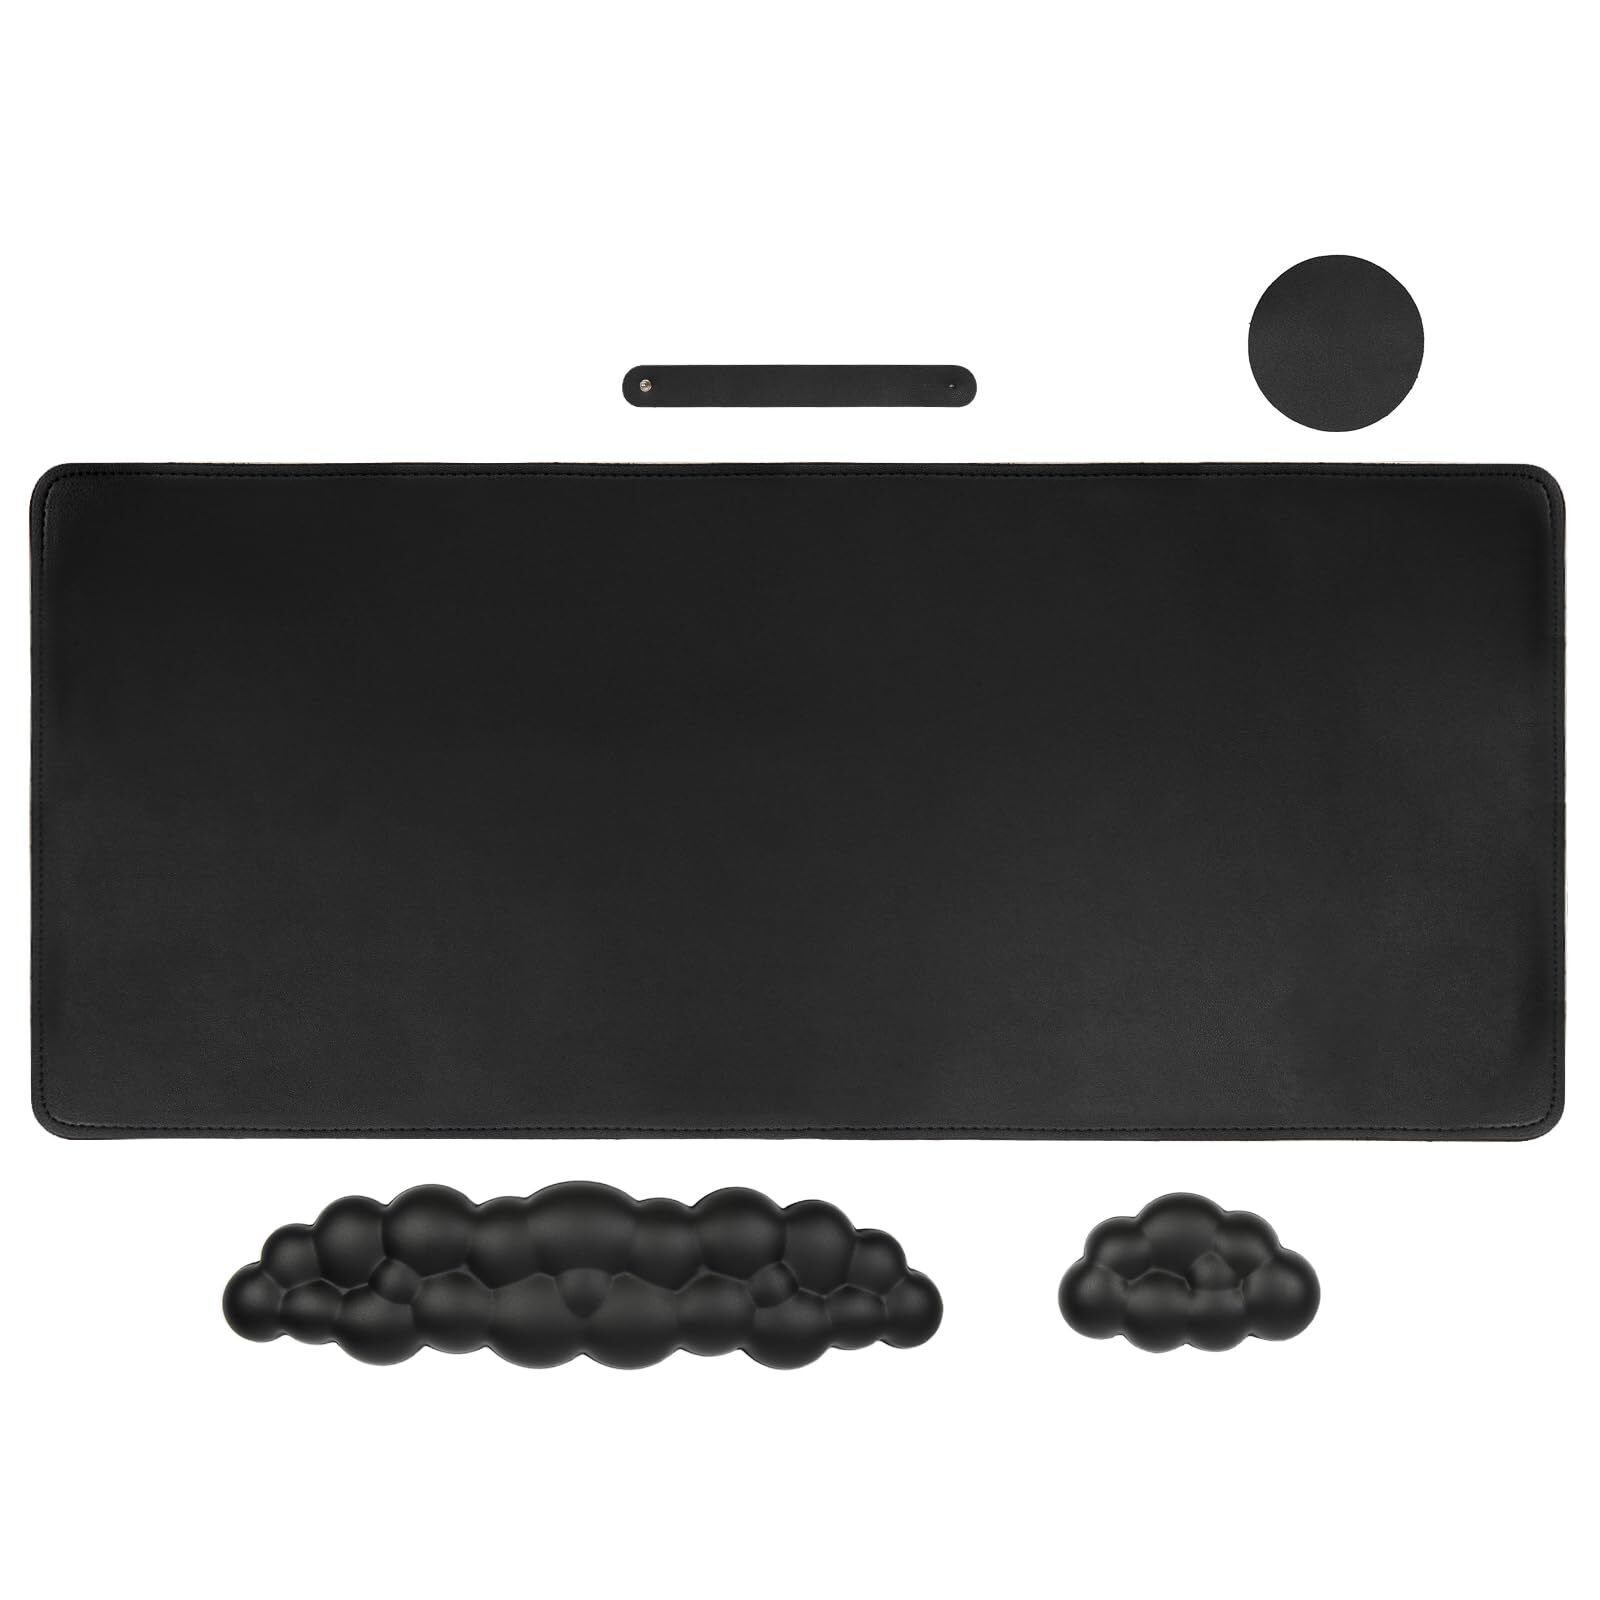 Upgrade Leather Cloud Keyboard Wrist Rest, 4-in-1 Extended Mouse Pad with Wri...